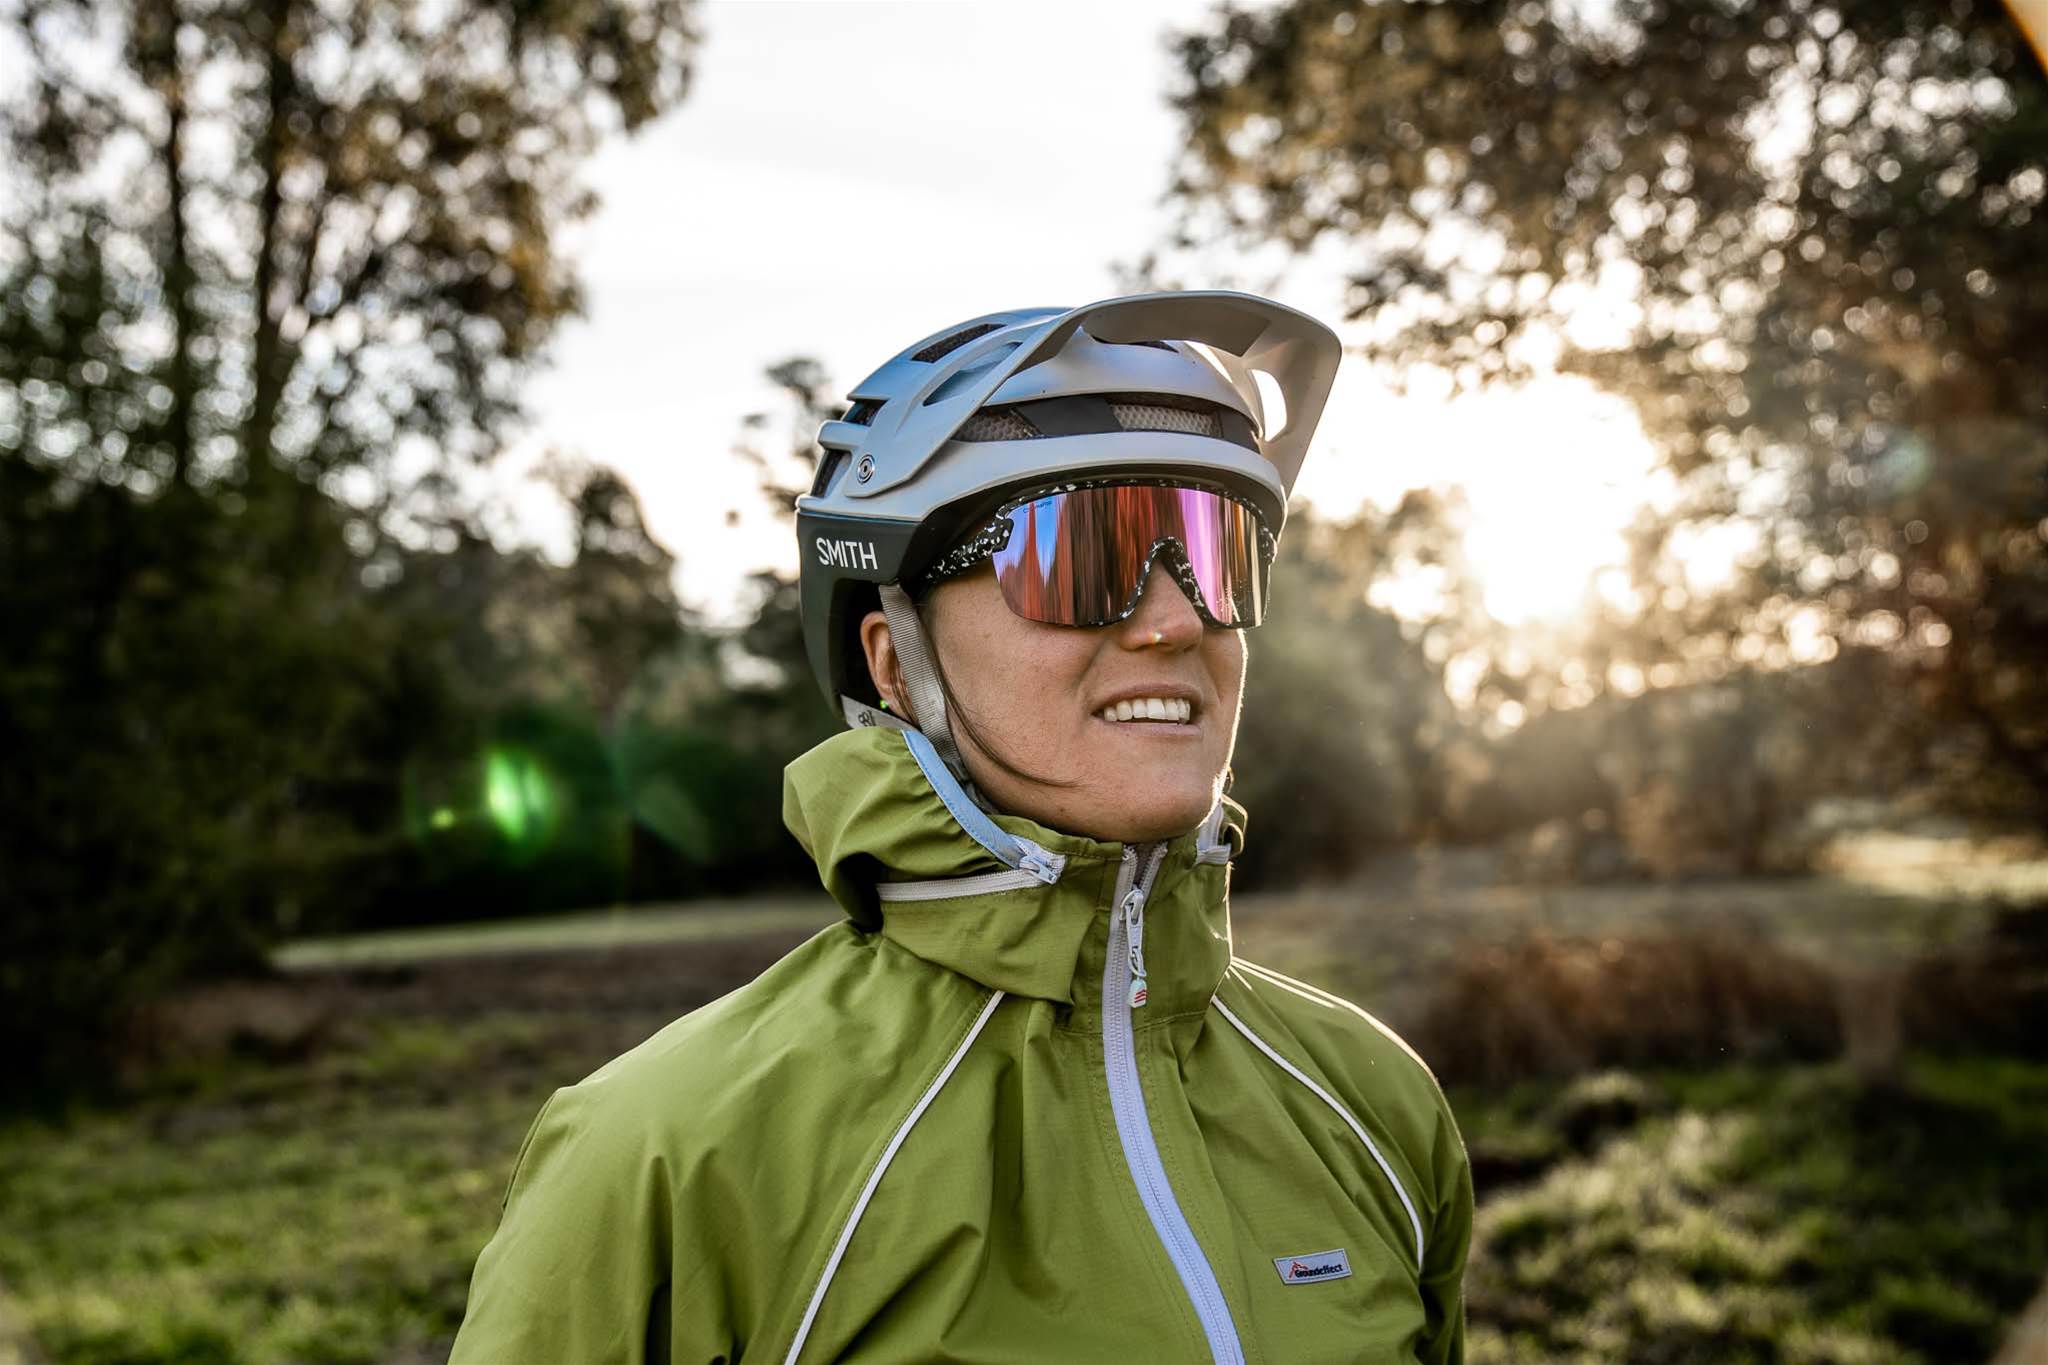 Versatile Women's Cycling Jackets For Any Climate